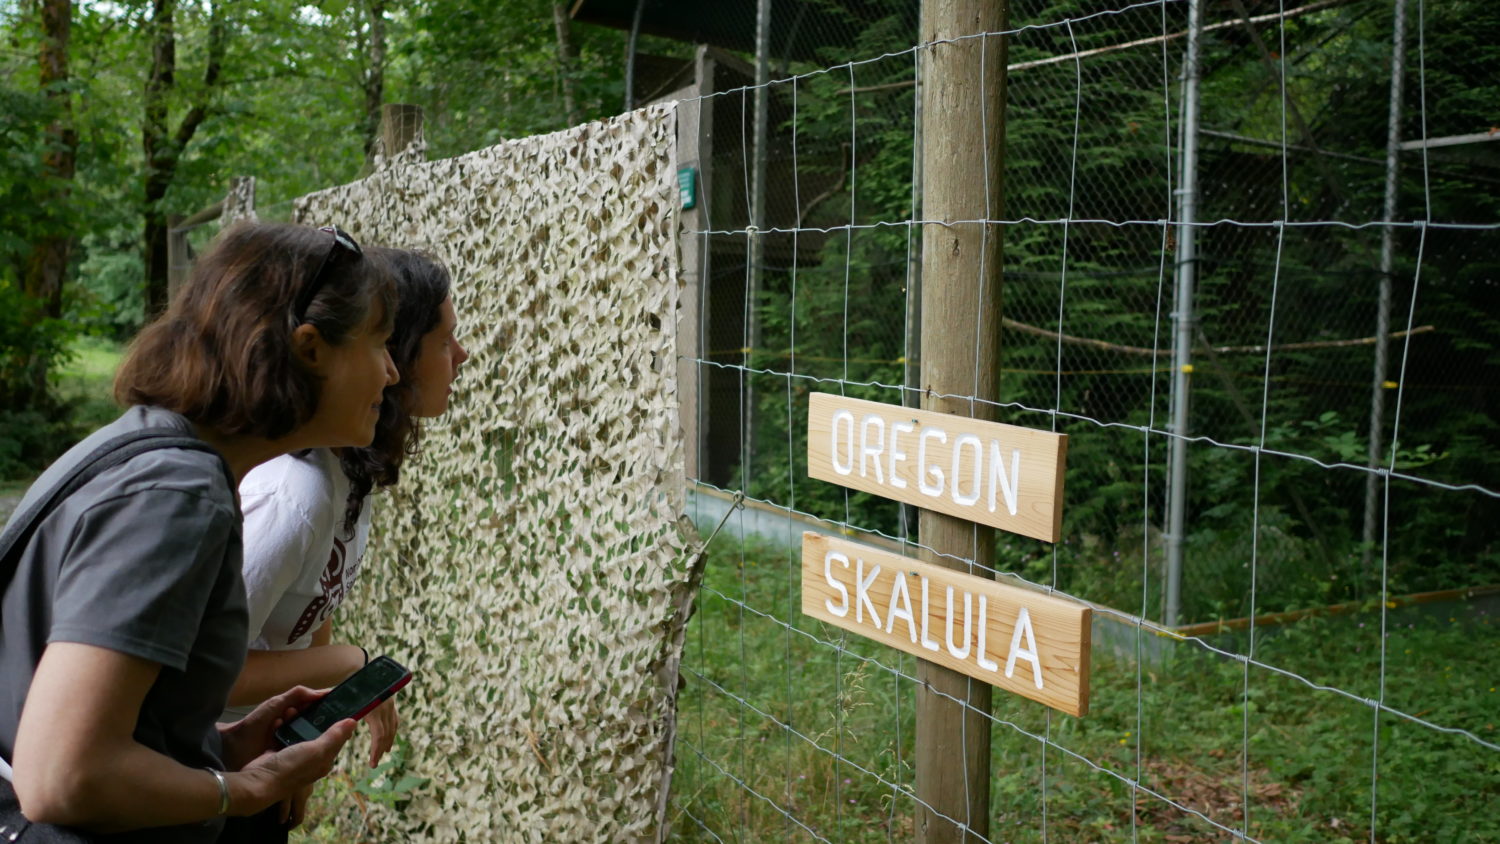 Cox and McCulligh search for spotted owls, Oregon and Skalula, in their quiet aviary. Photo: Carol Linnitt / The Narwhal